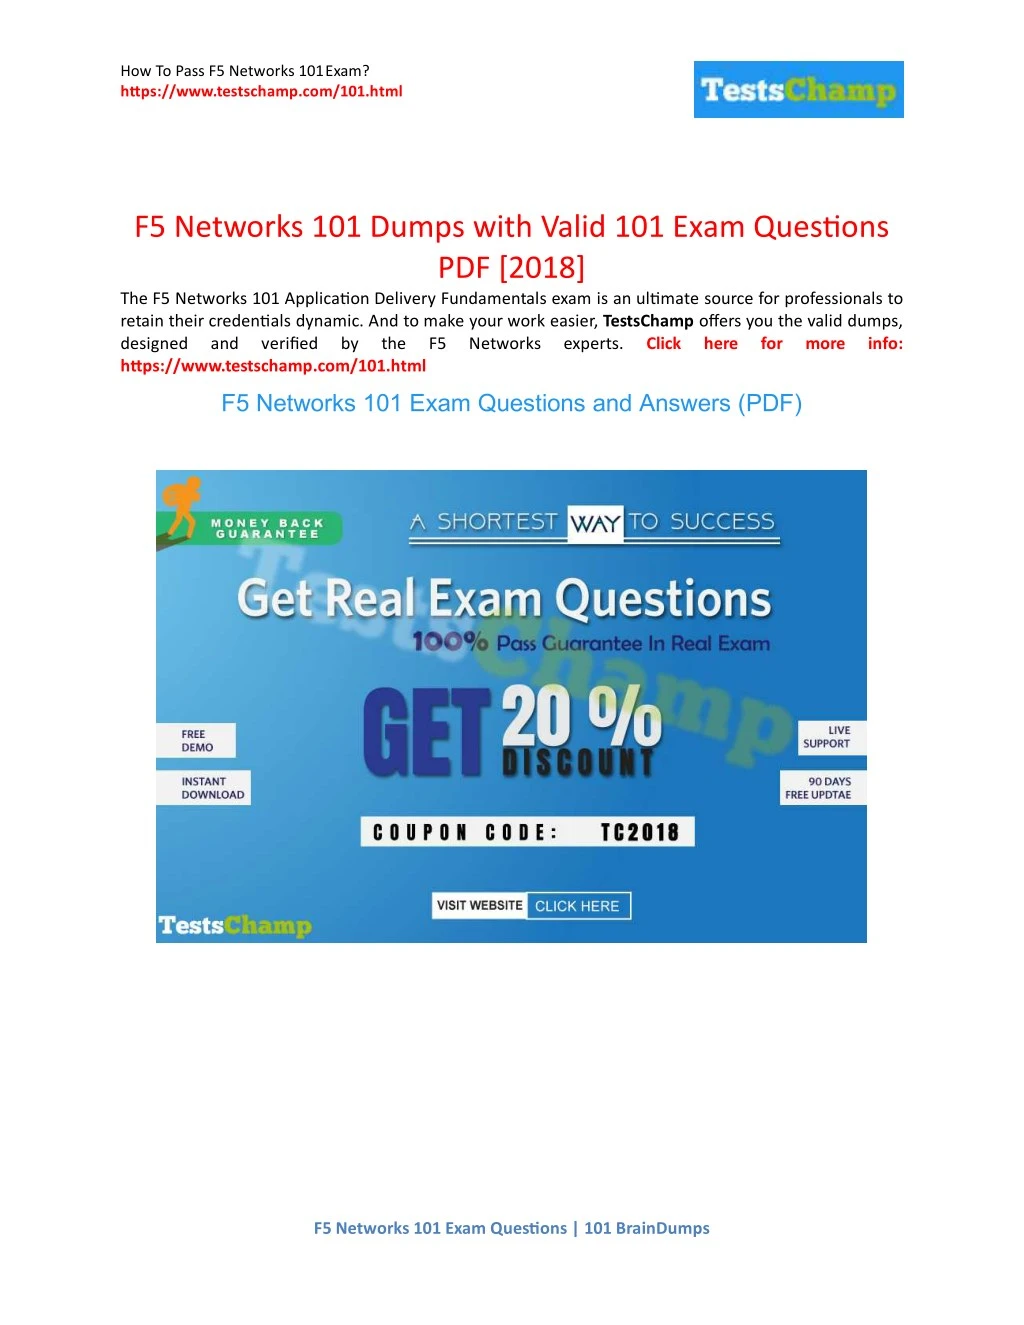 how to pass f5 networks 101exam https